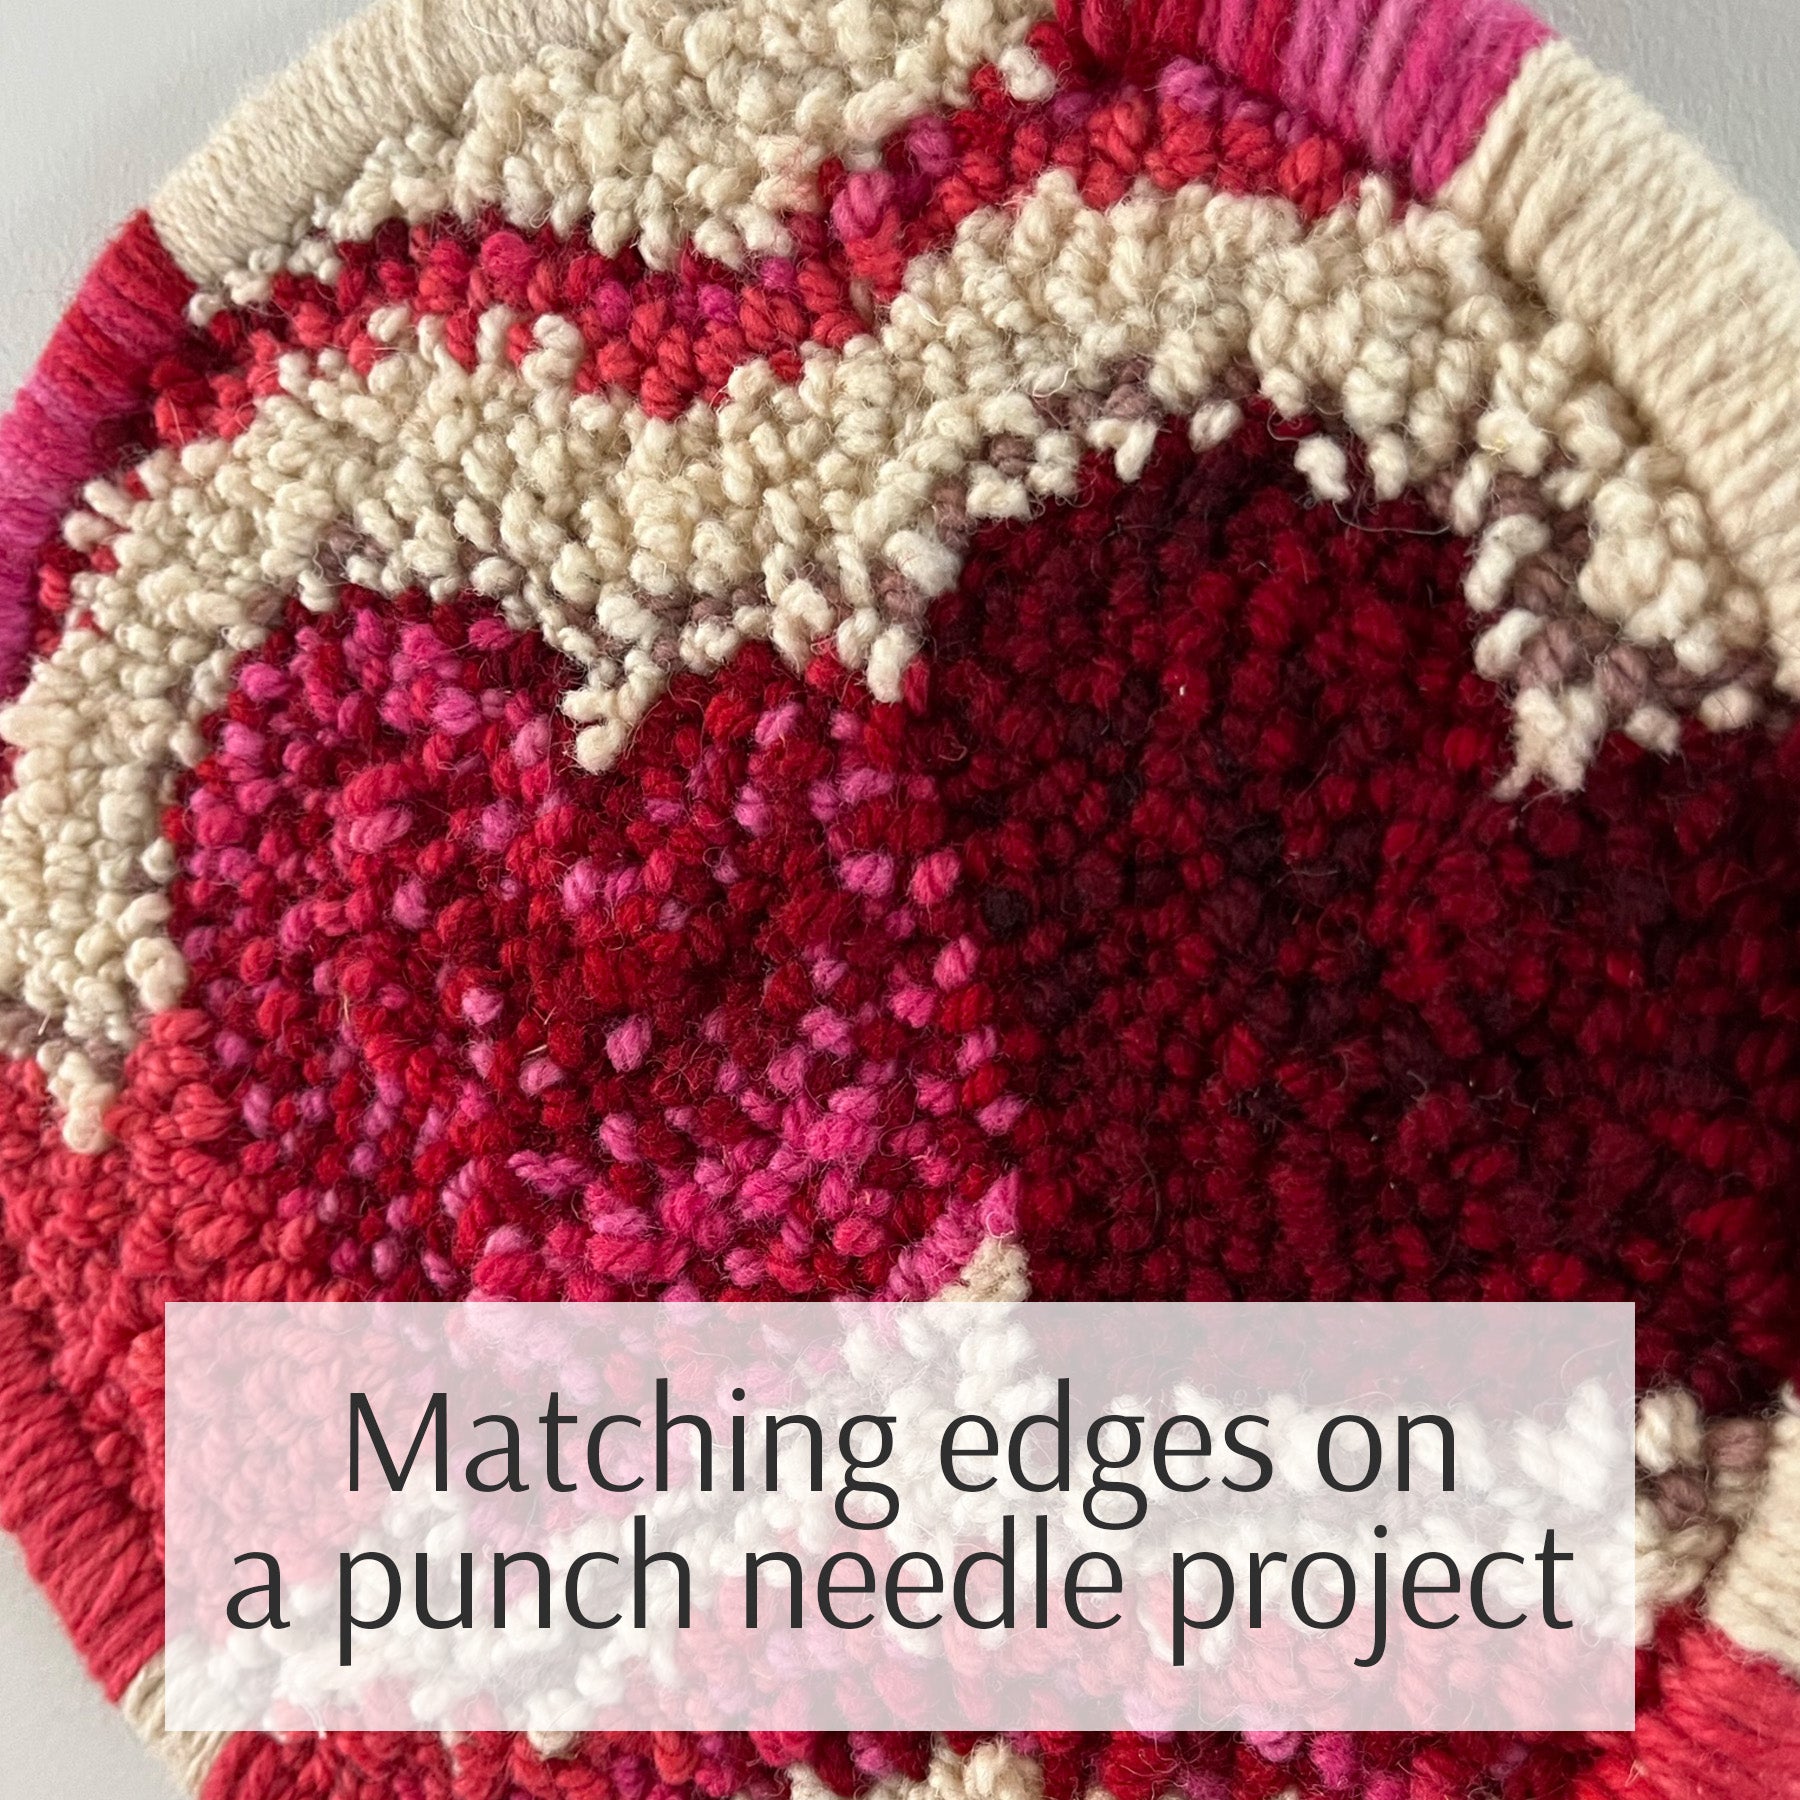 Matching edges on a punch needle project